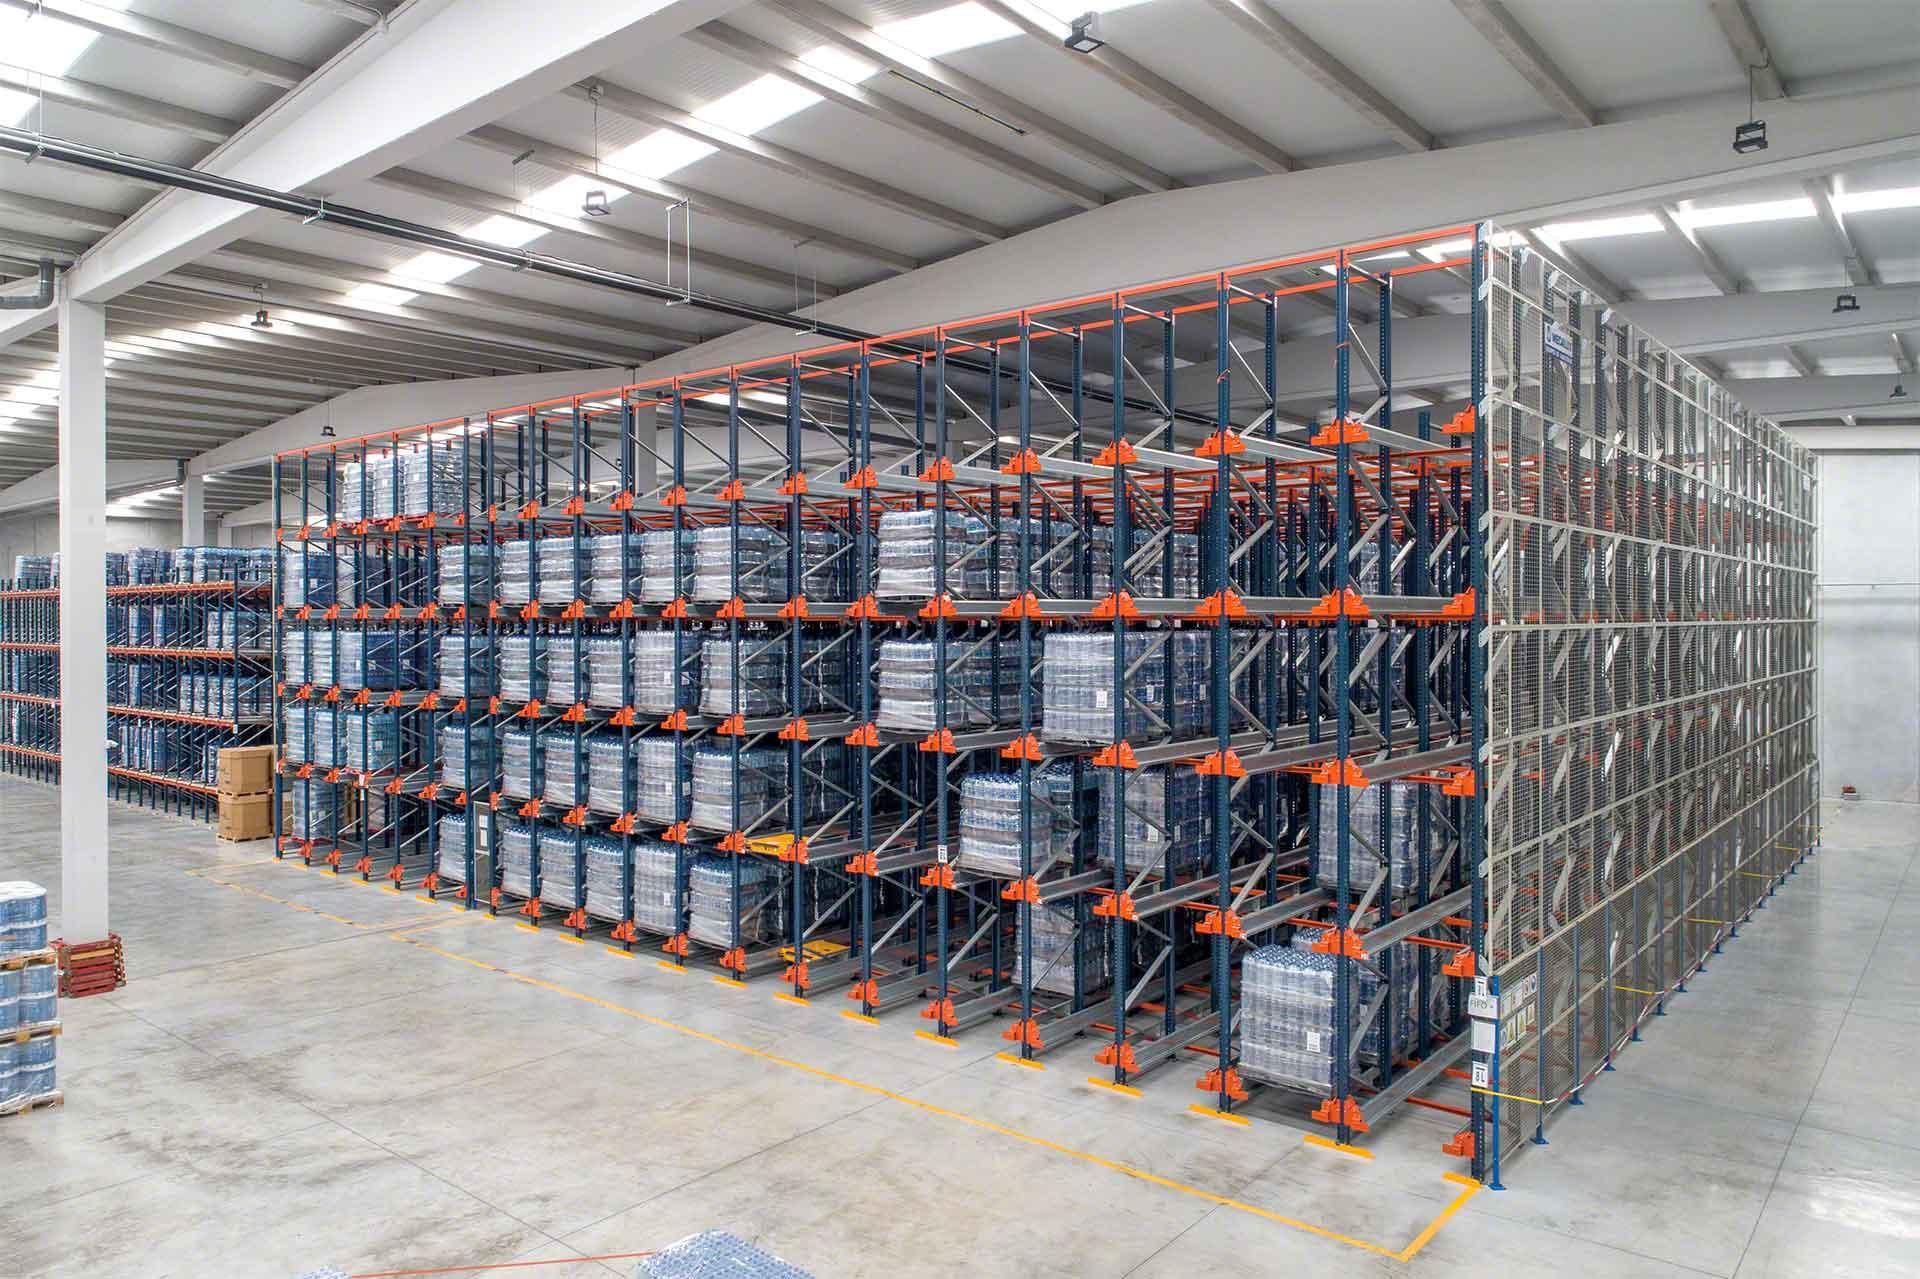 Most compact storage systems work in line with the FIFO method